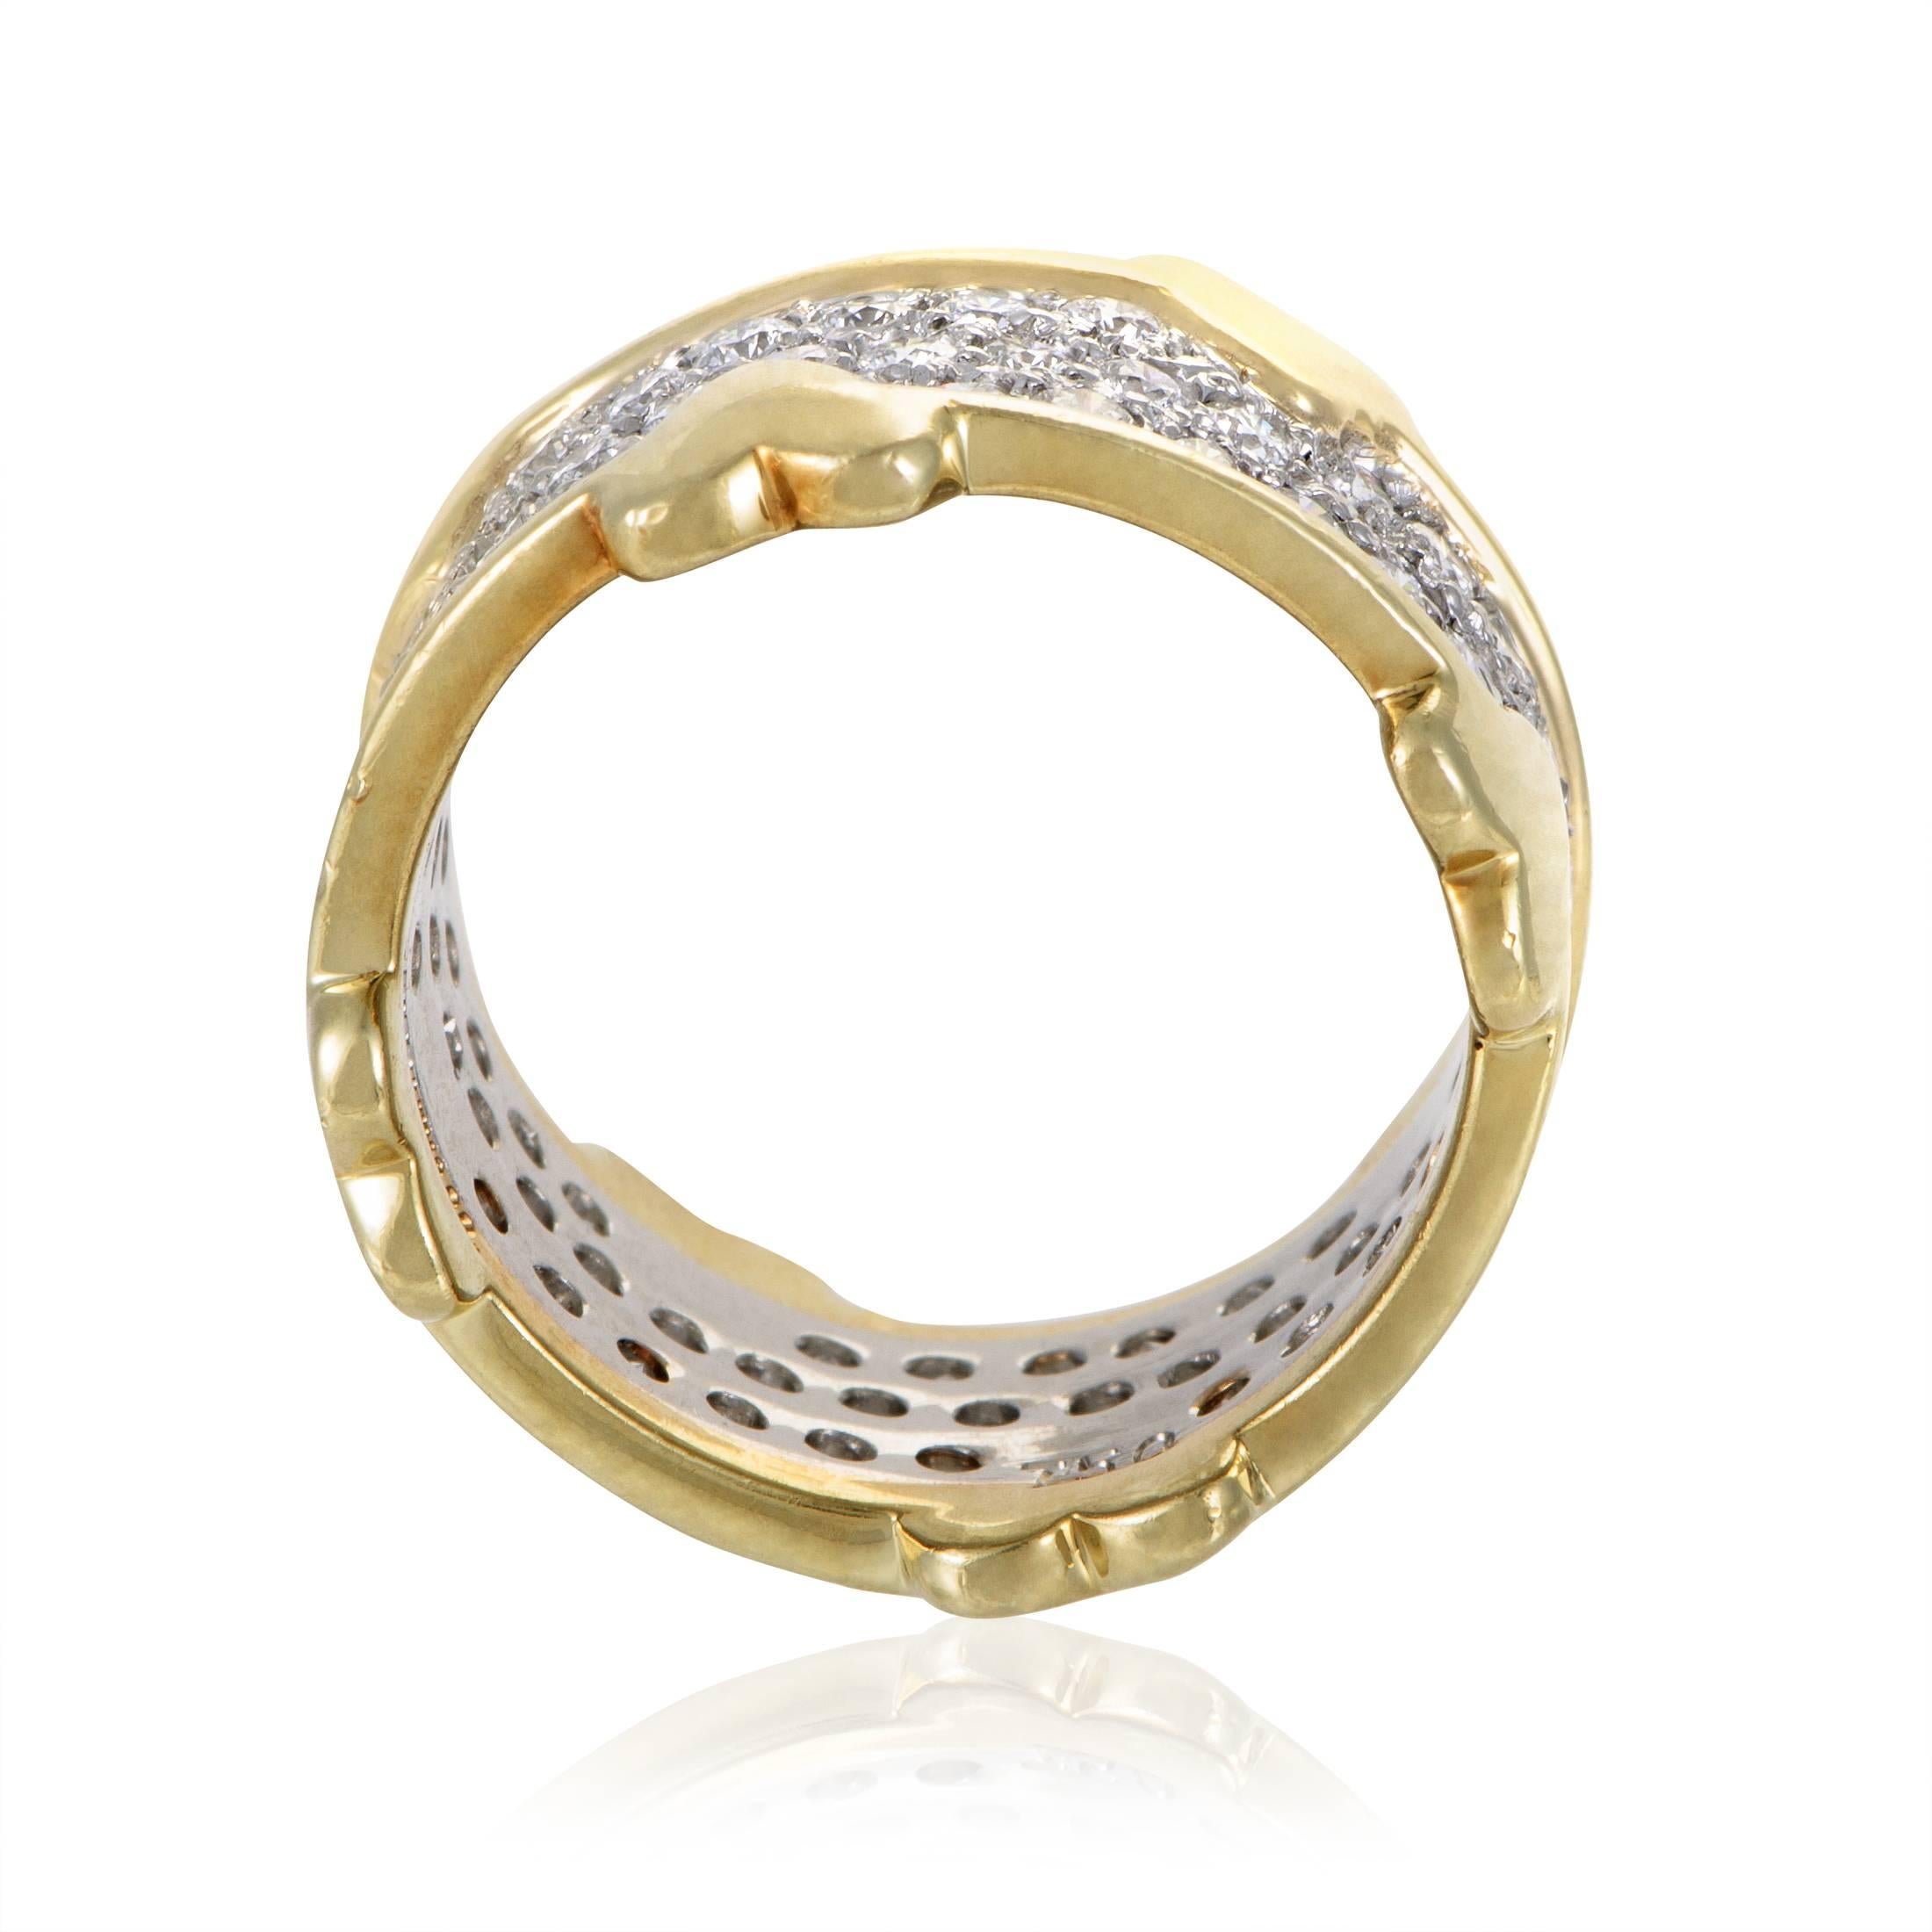 Prestigious platinum is paved with fascinating E-color diamonds of VVS clarity weighing in total 2.40 carats while precious 18K yellow gold aptly frames the entire item in this wonderful band designed by Jean Schlumberger for Tiffany &